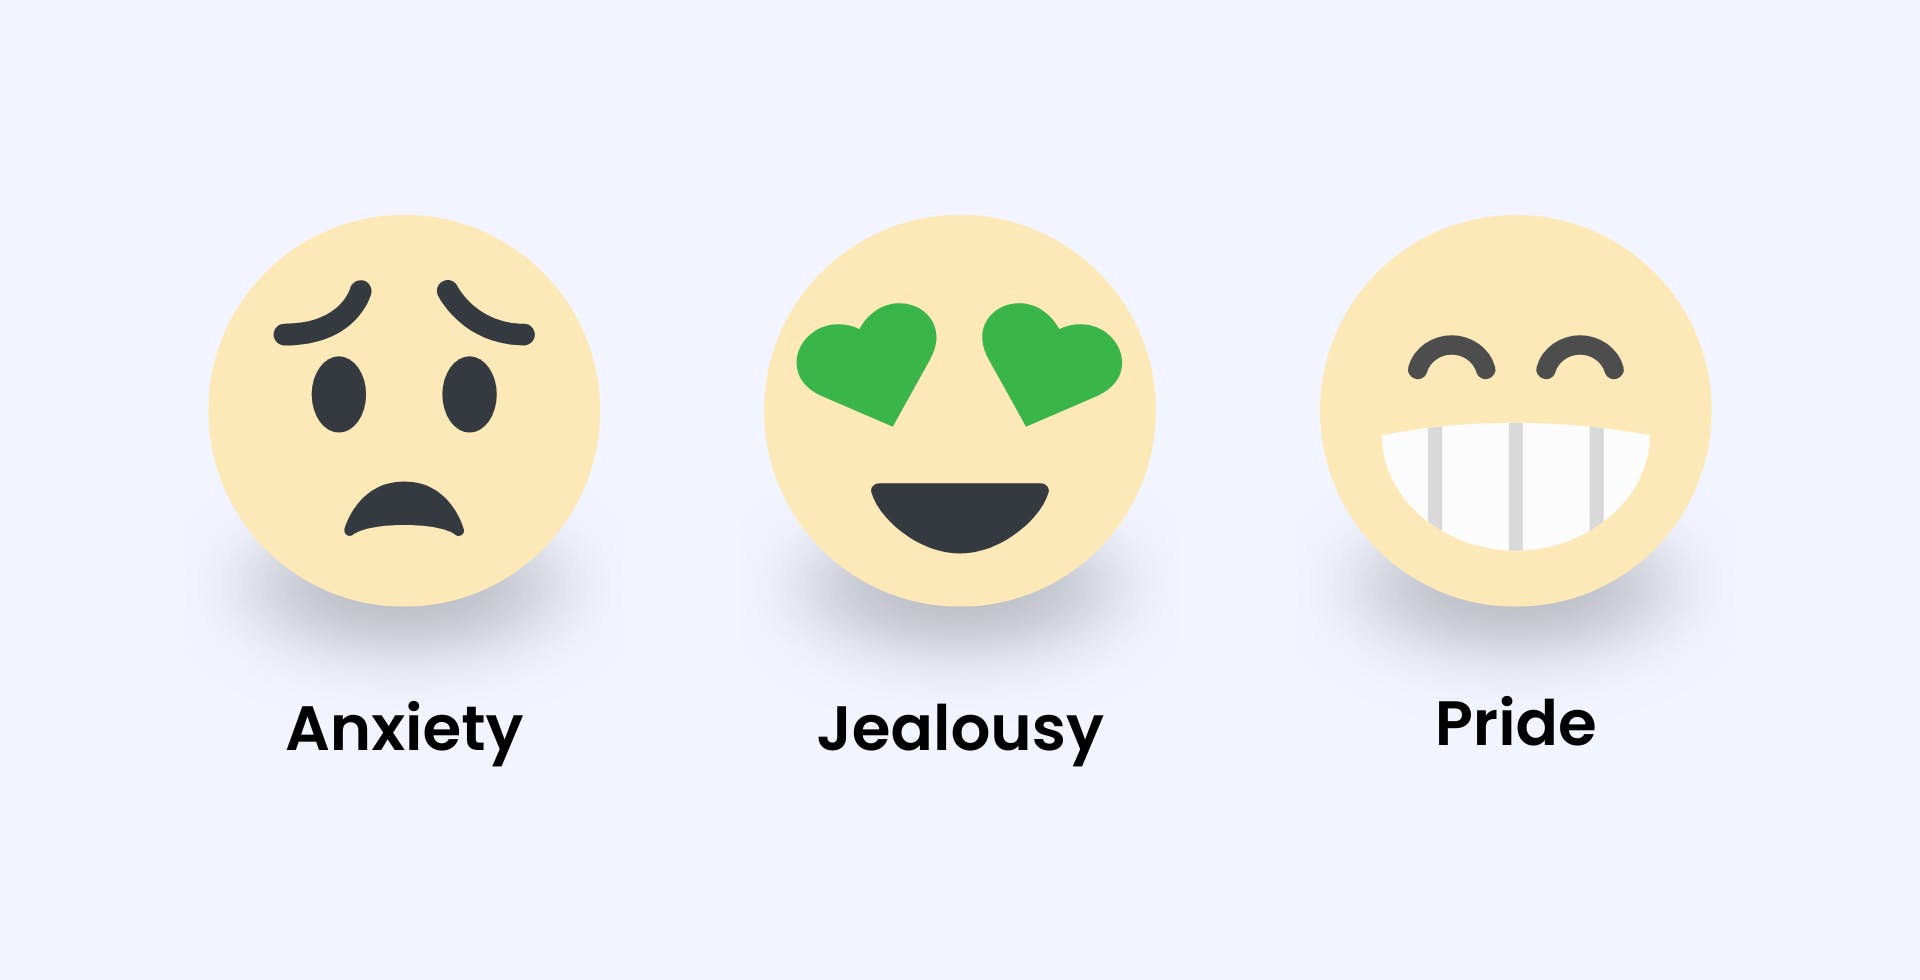 Image highlights the secondary emotions of anxiety, jealousy, and pride with emoji representing each feeling